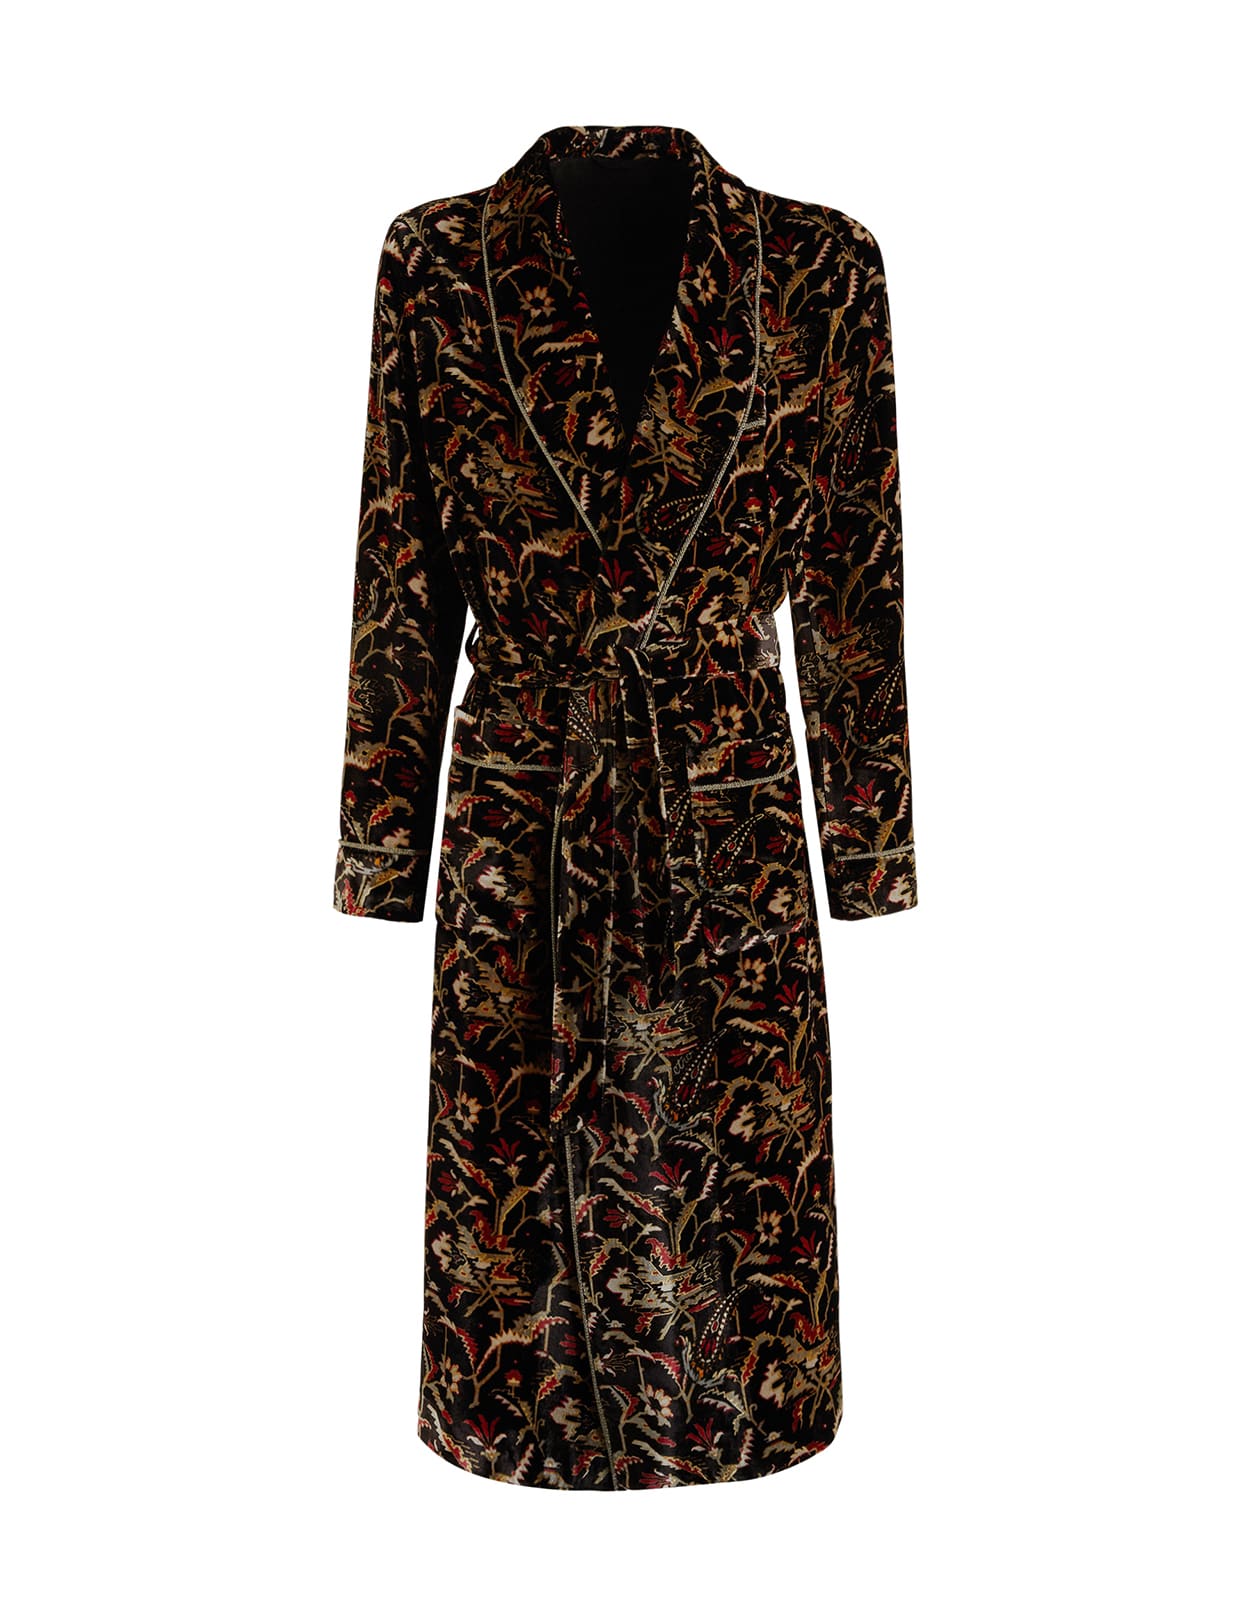 Etro Man Black Robe Coat With Floral Patterns